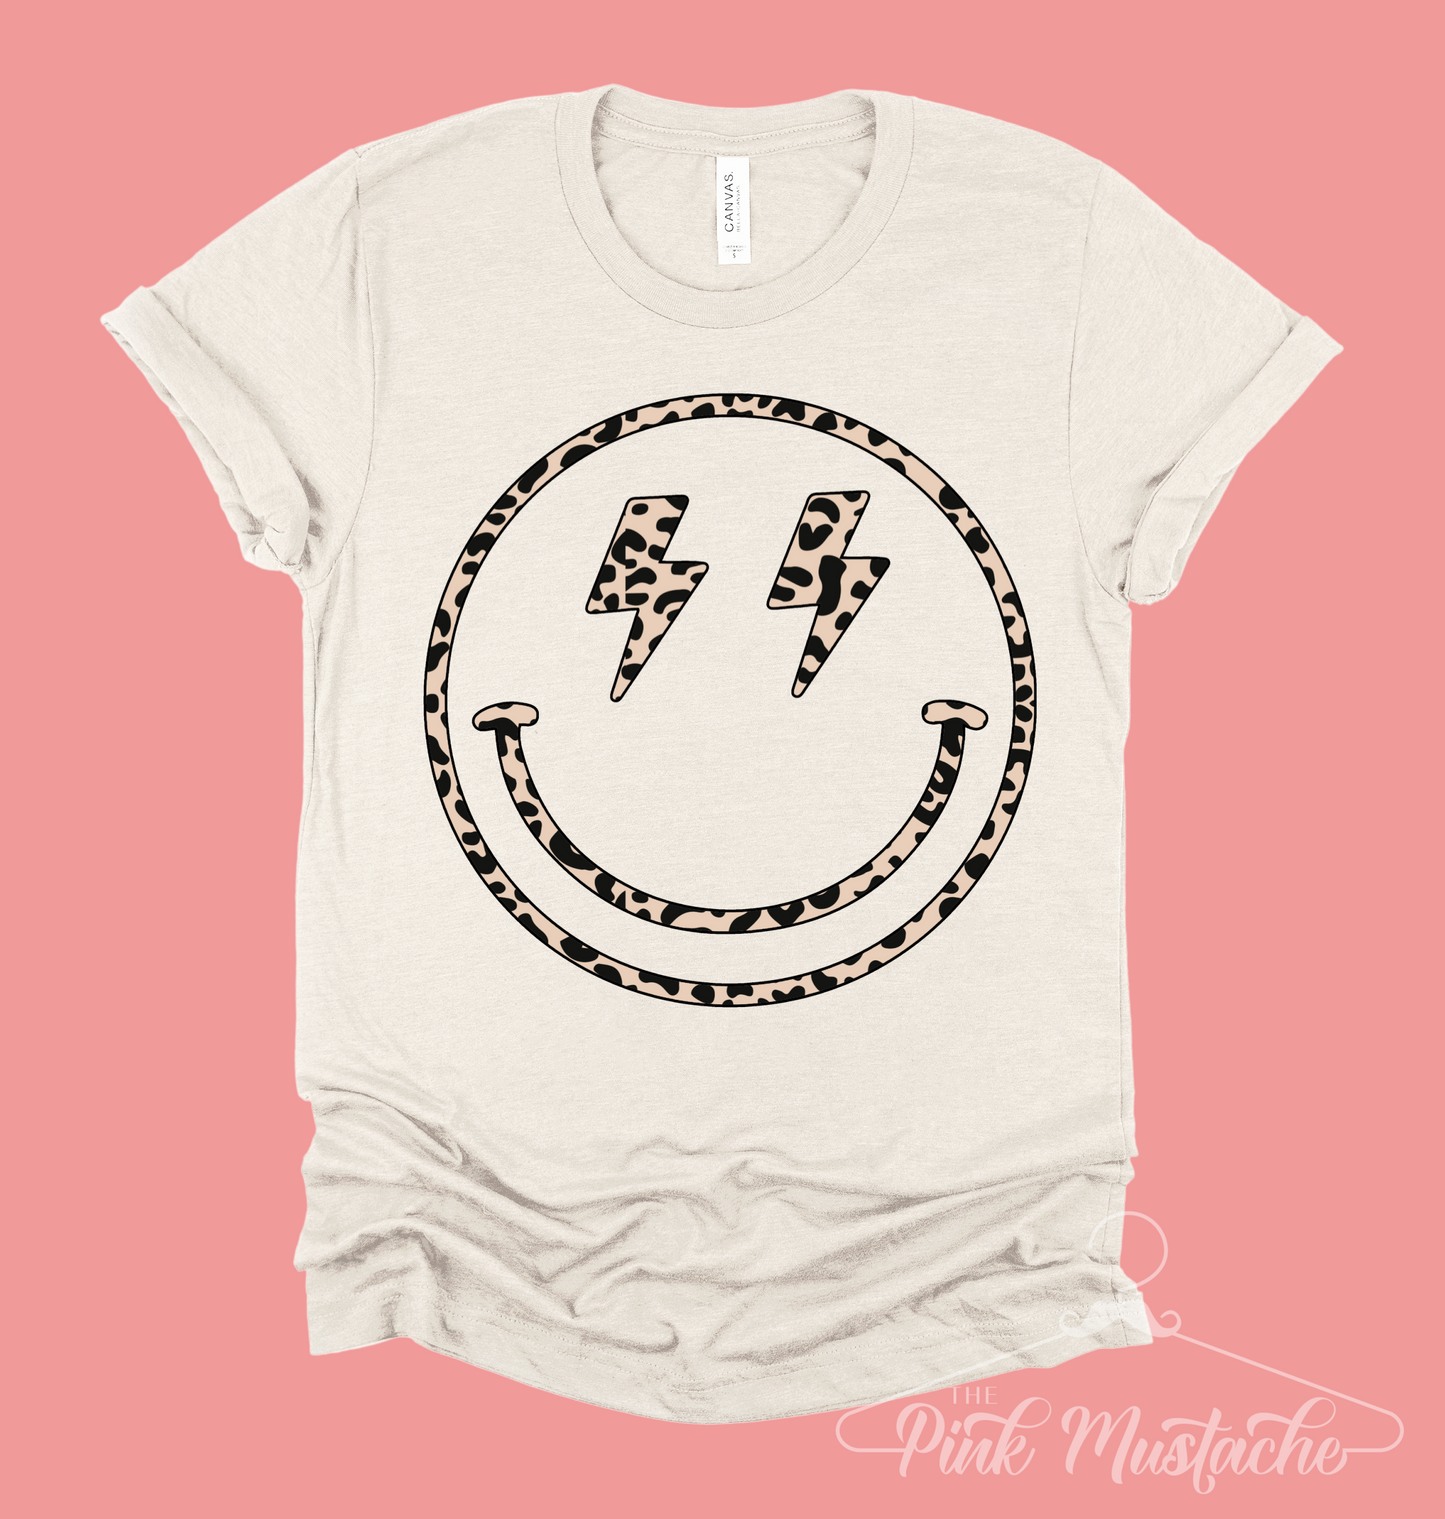 Smiley Leopard Tee/ Super Cute Tee - Toddler, Youth, and Adult Sizing Available